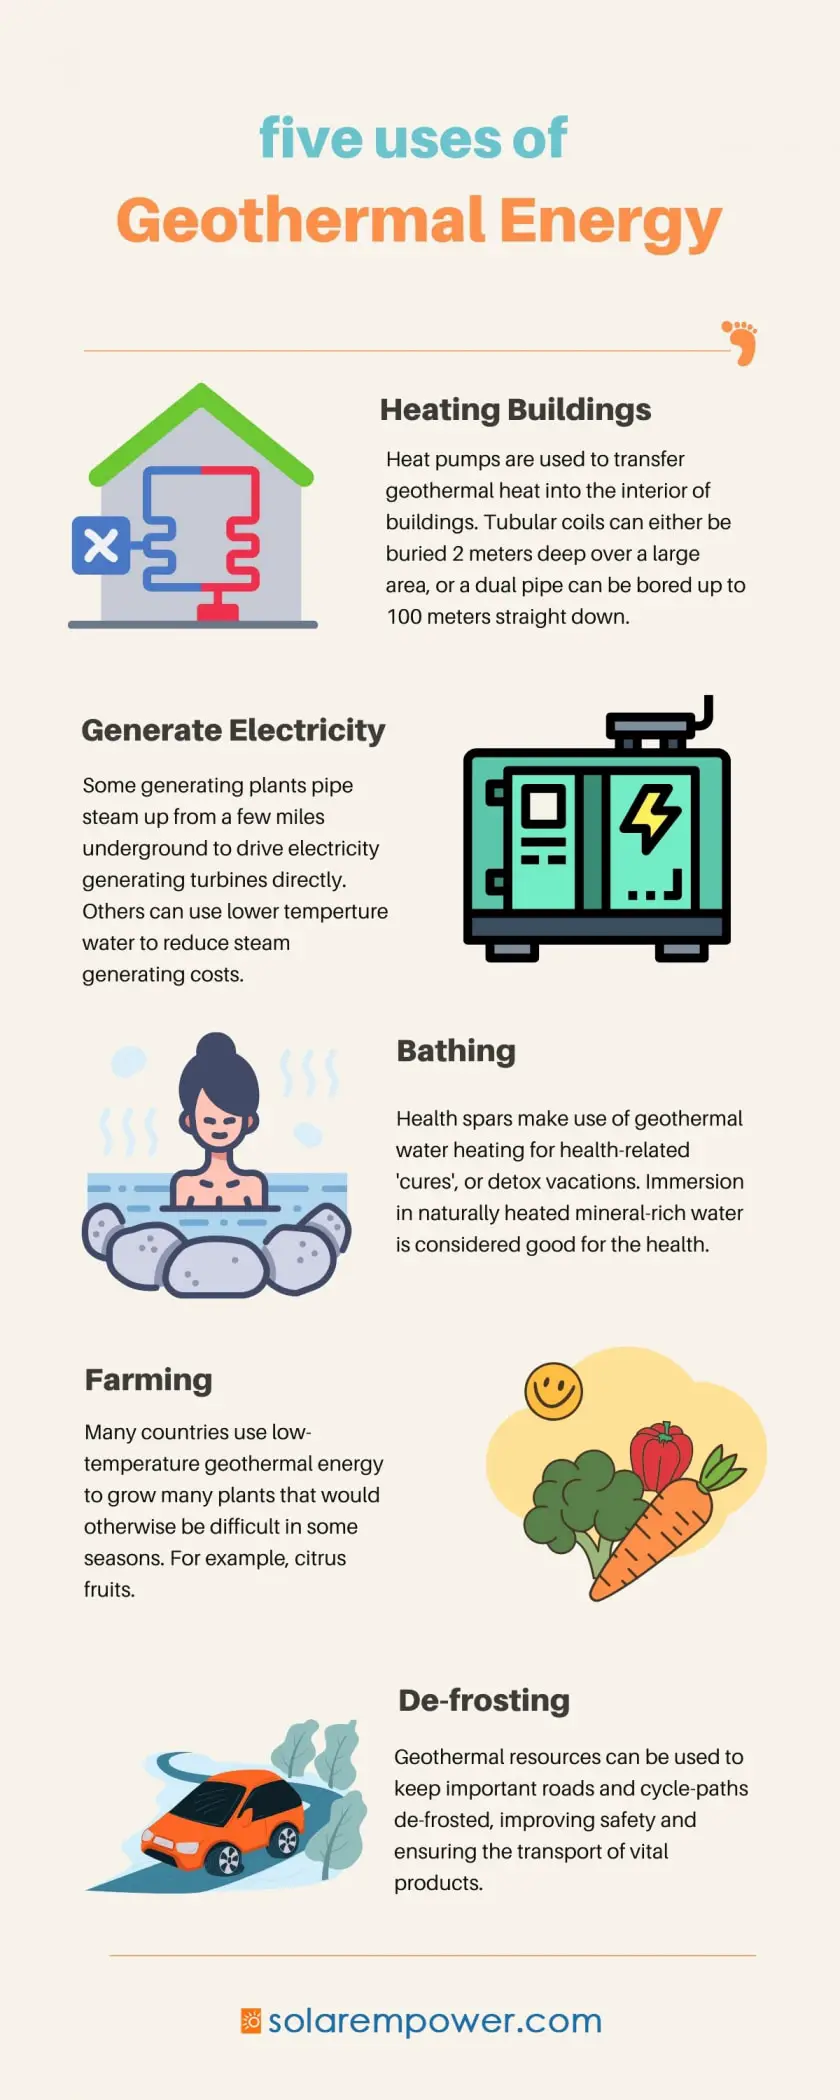 Infographic – What are 5 uses of geothermal energy?